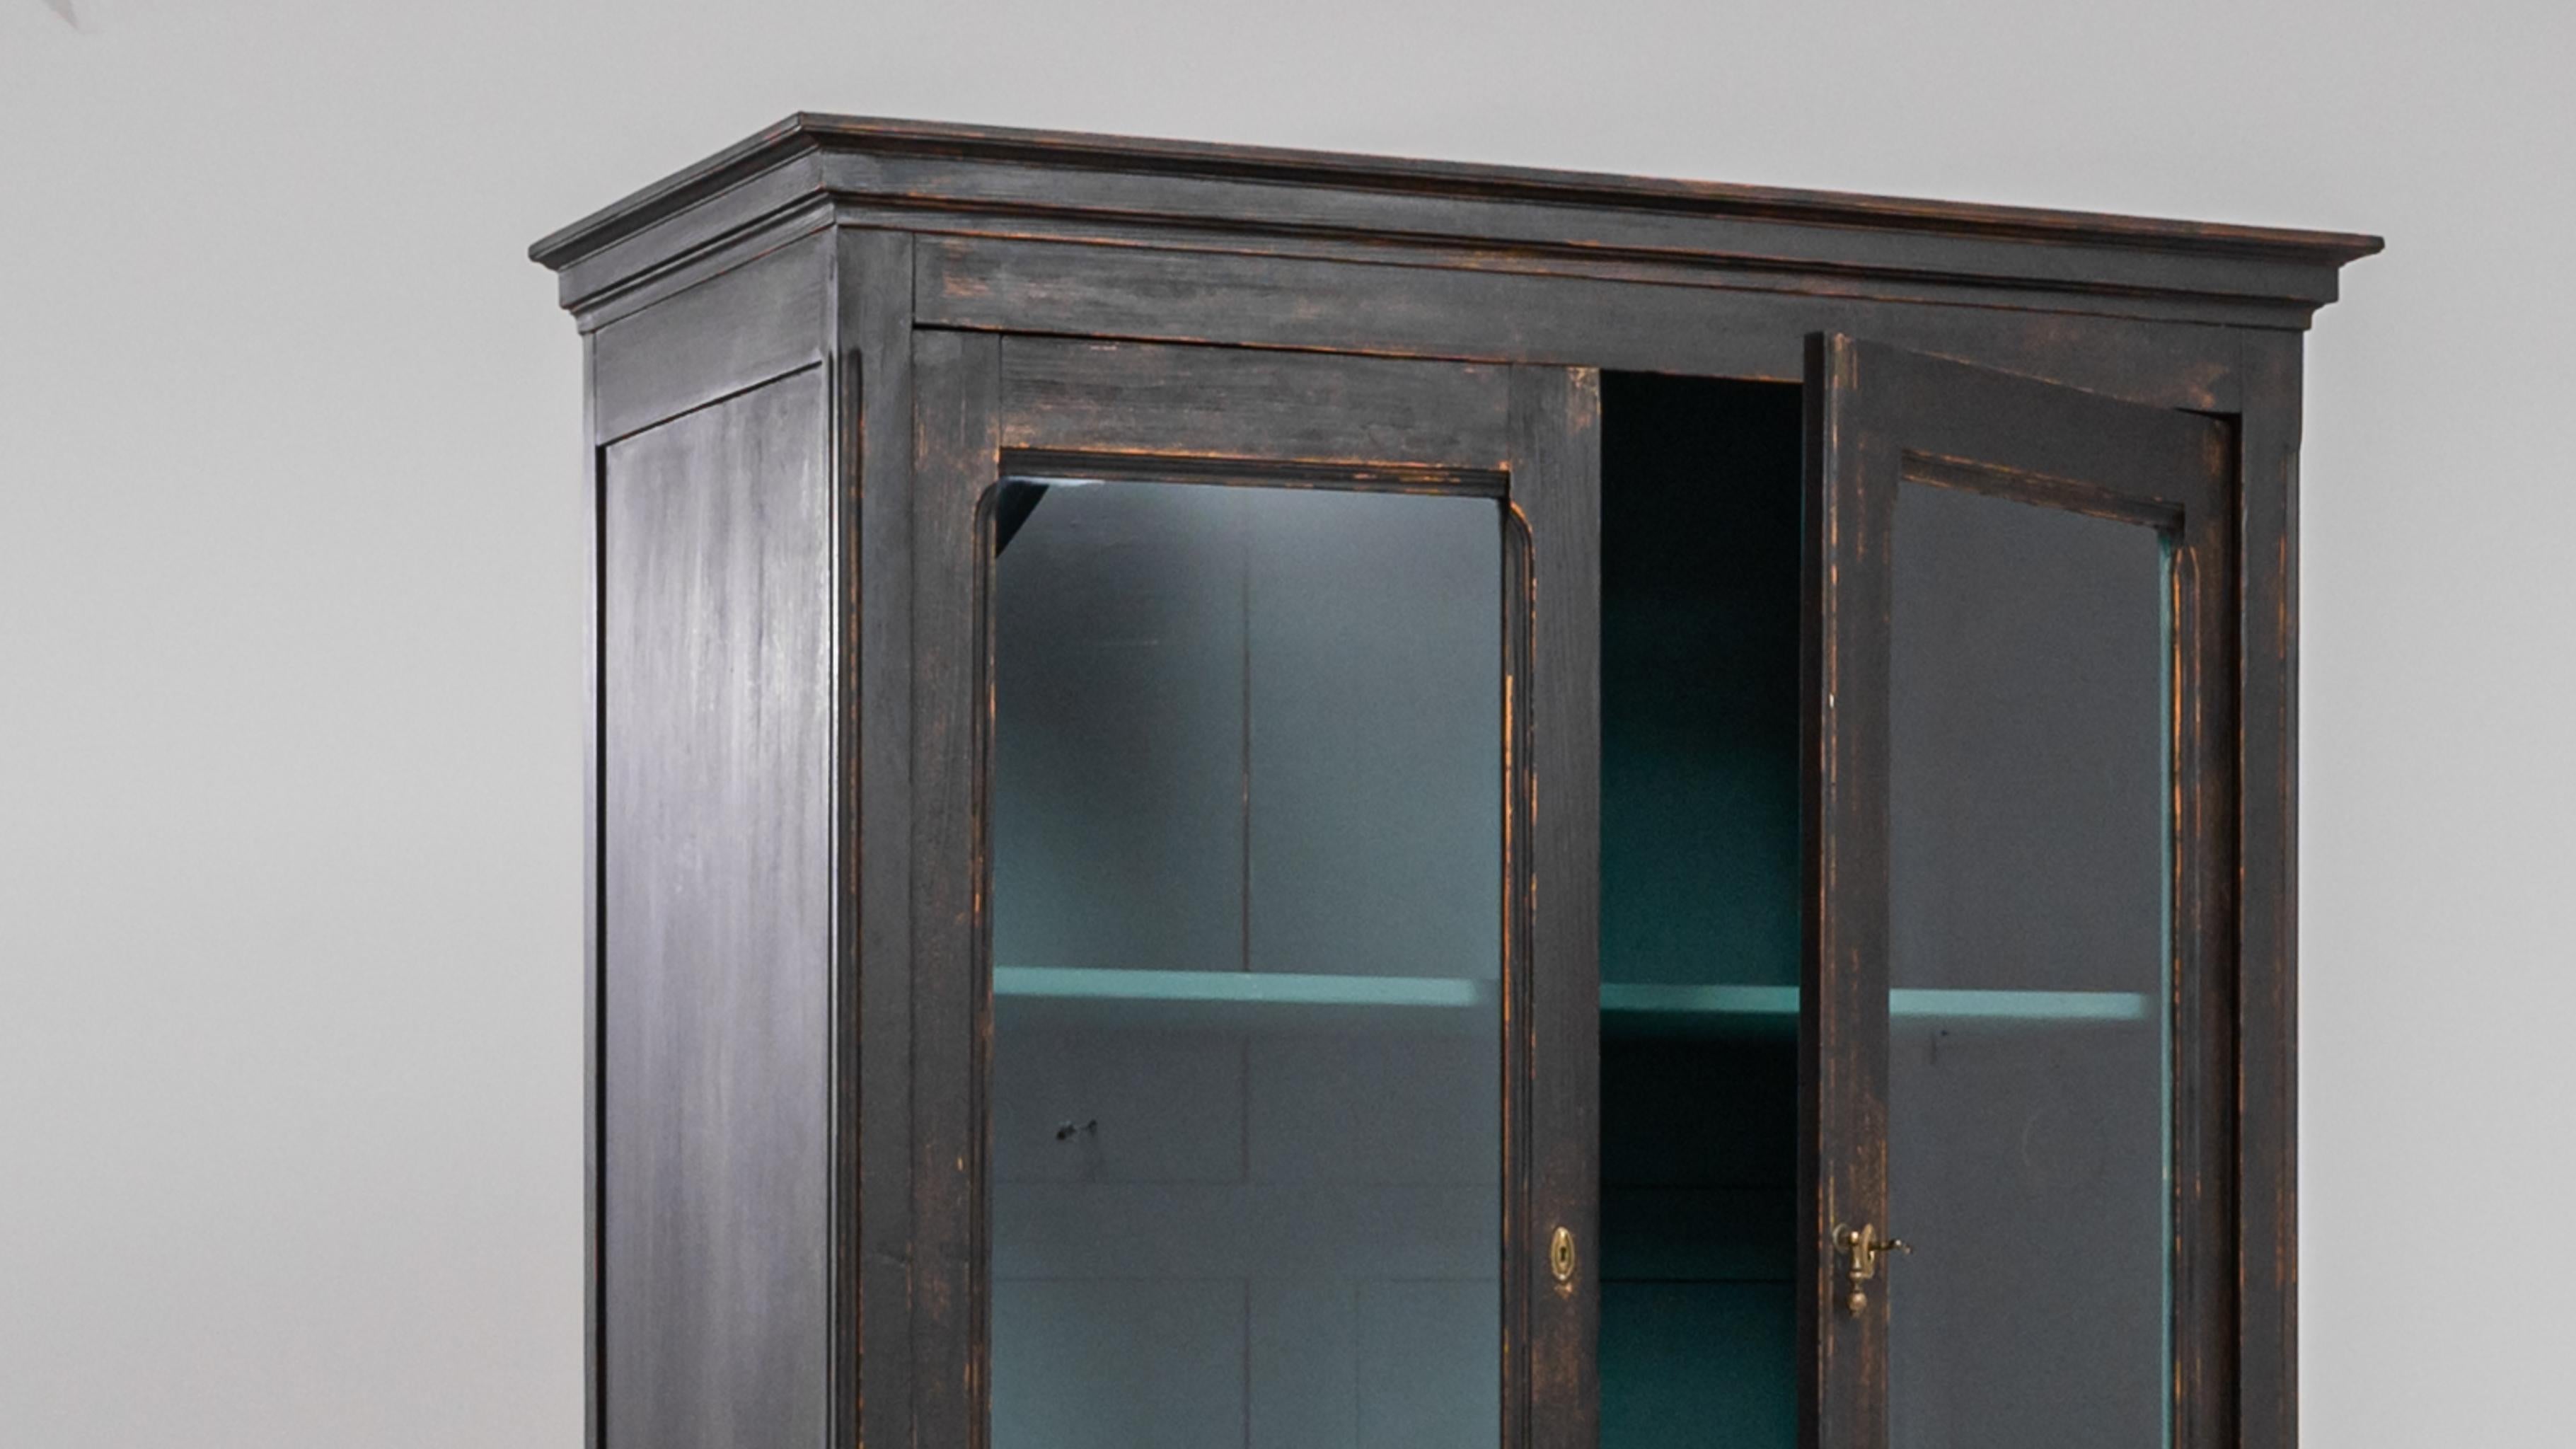 This turn of the century wooden vitrine makes a distinguished display case. Sourced from France, the sober black-painted finish has acquired a gentle patina over time, revealing glimpses of the warm cherry-colored wood beneath. Paned windows give a